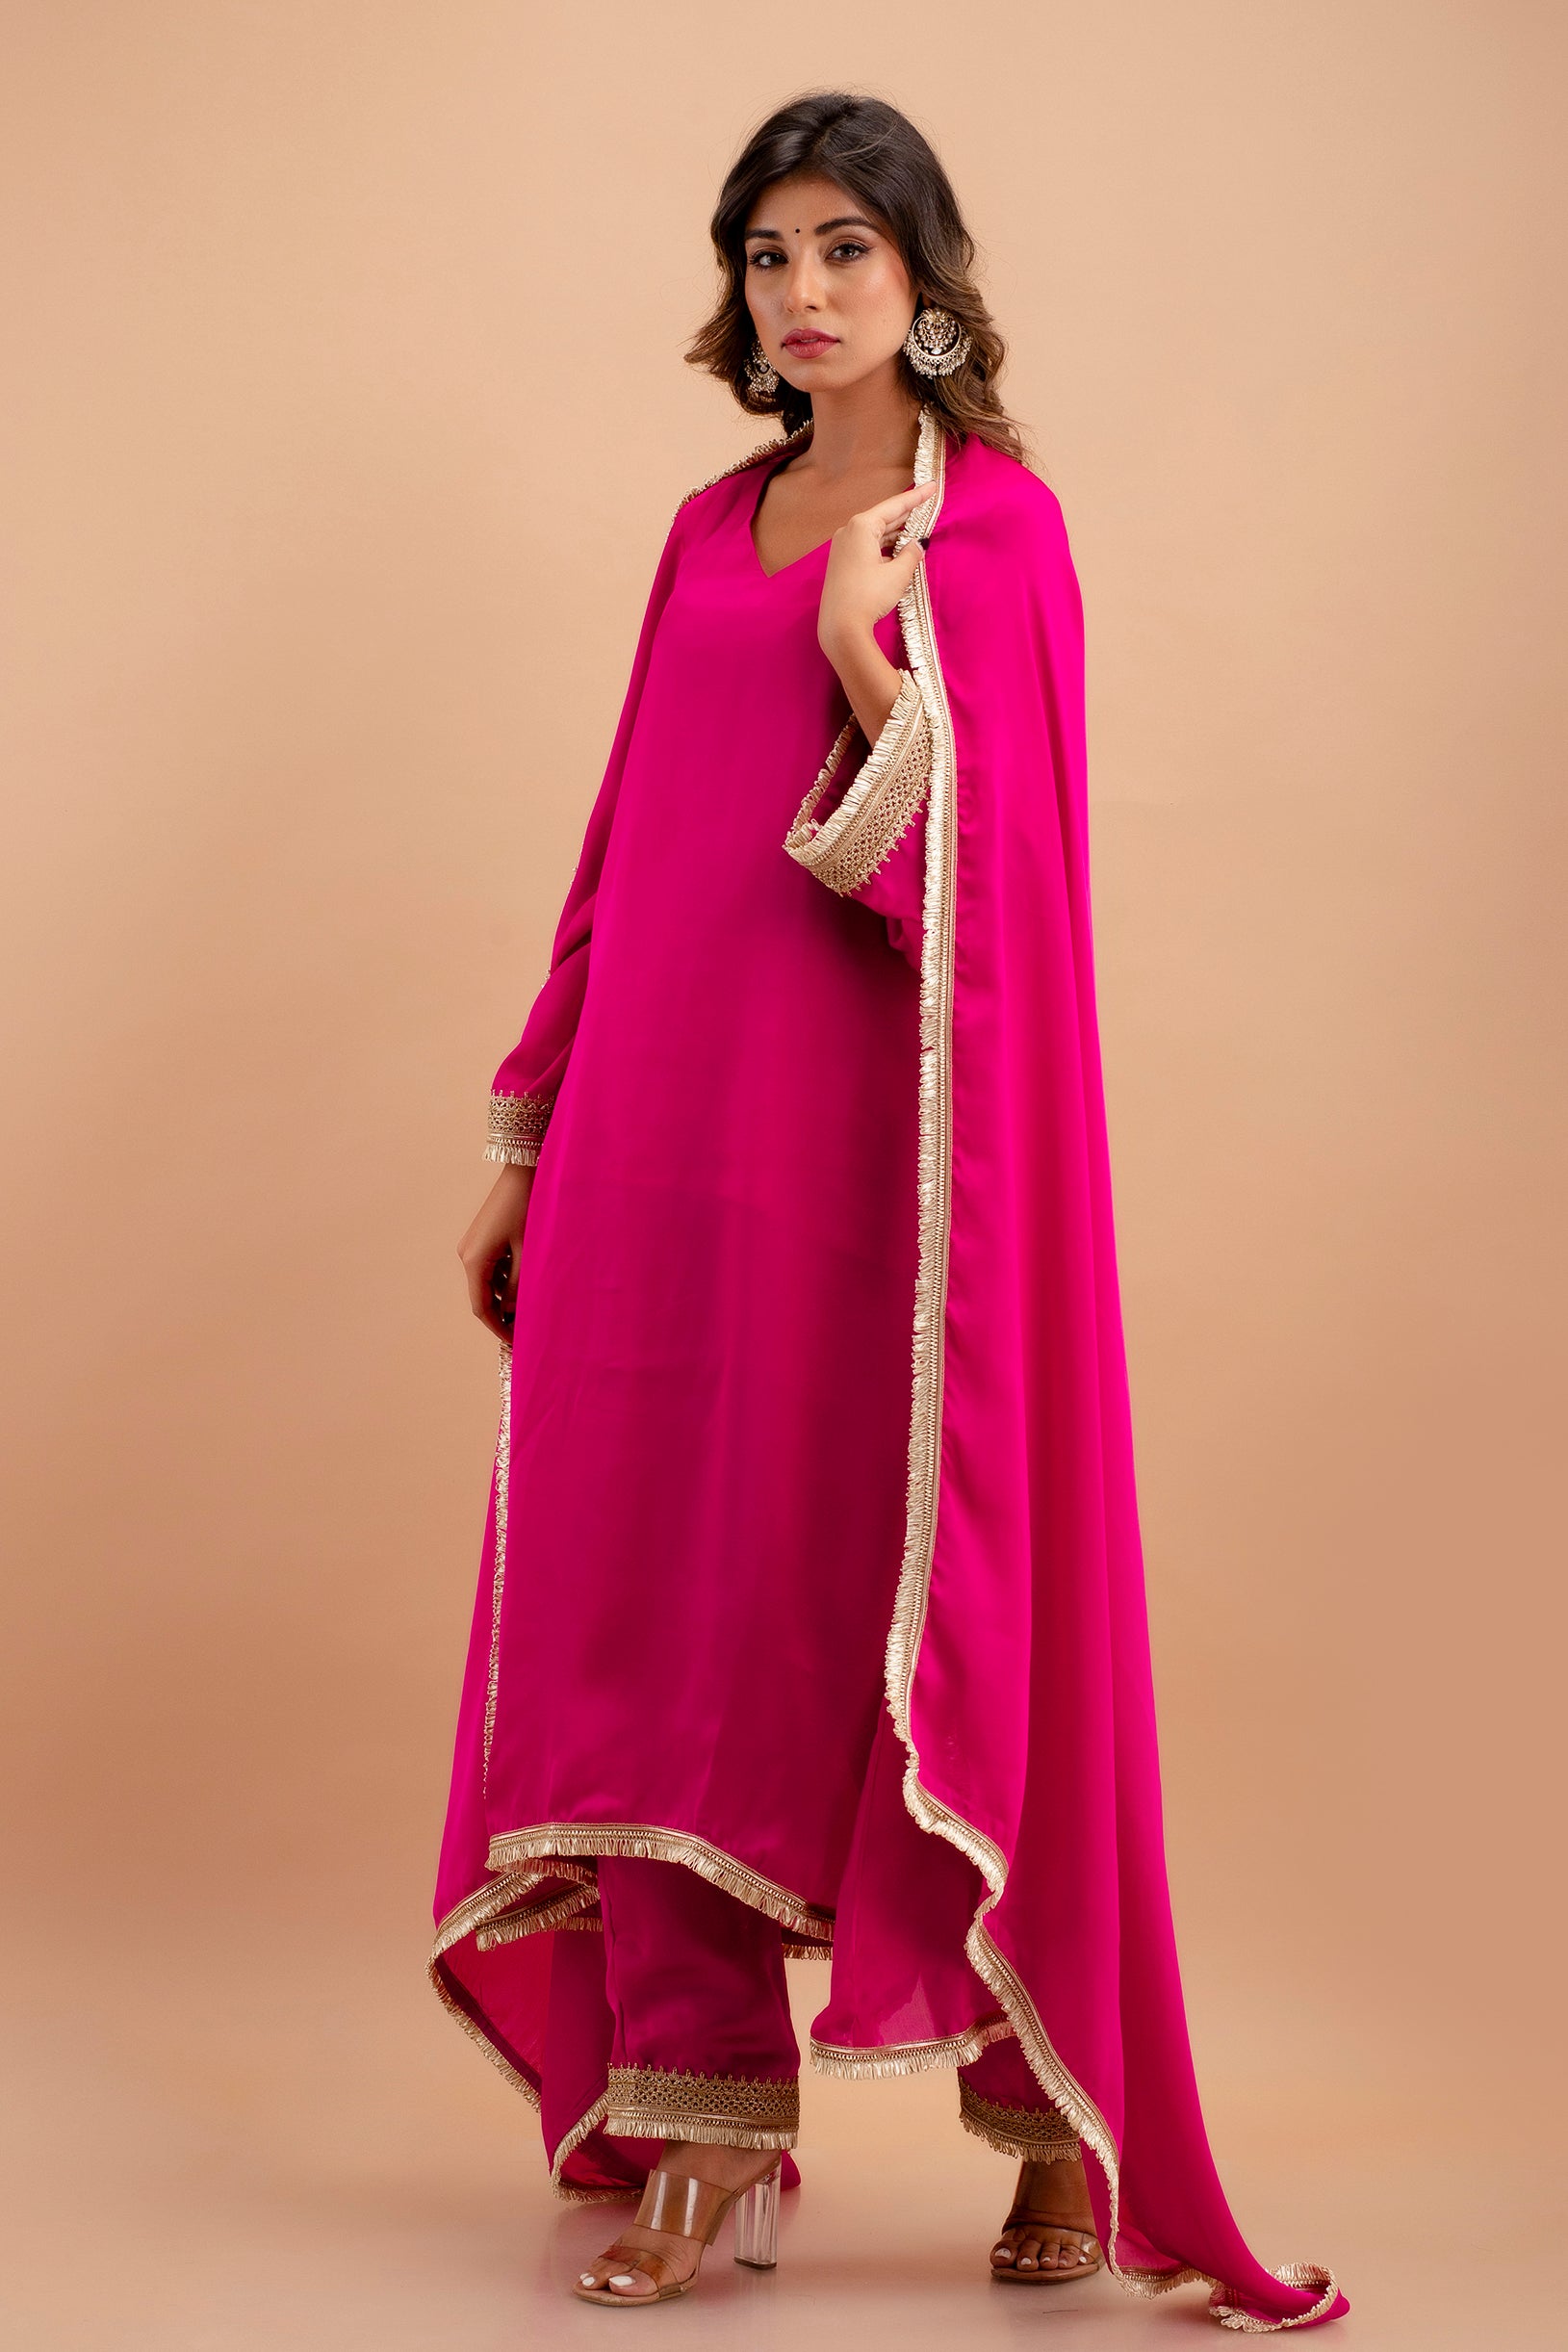 Adorned with Intricate Lace Embellishments, the Ensemble Features a Kurta, Pants, and Dupatta